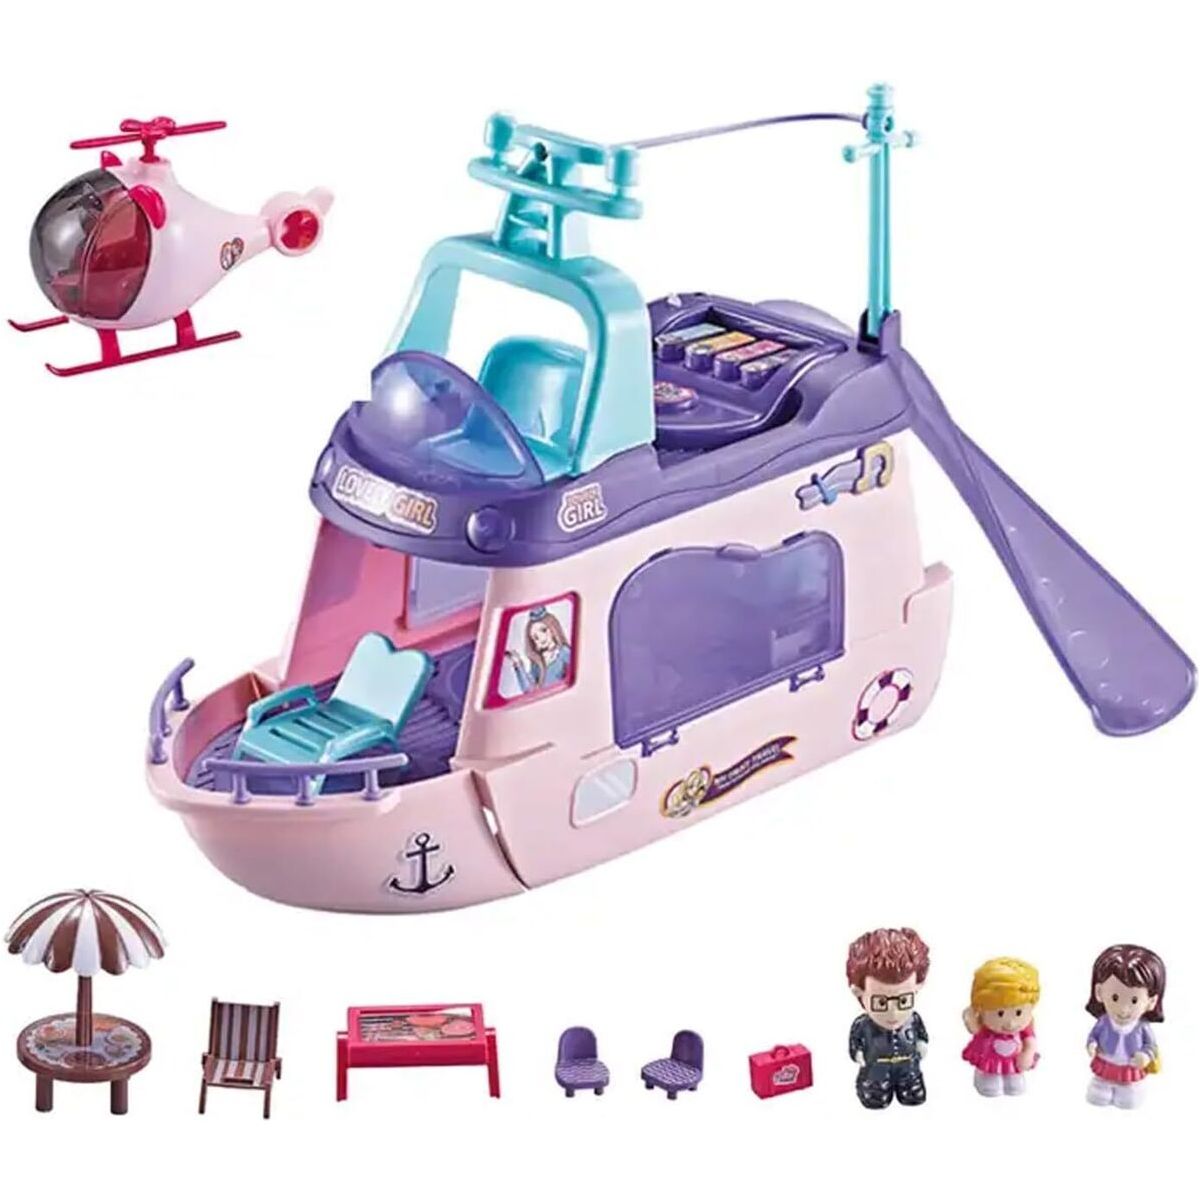 Engaging Light & Sound Travel Around The World Fashion Toy Yacht Set for Kids